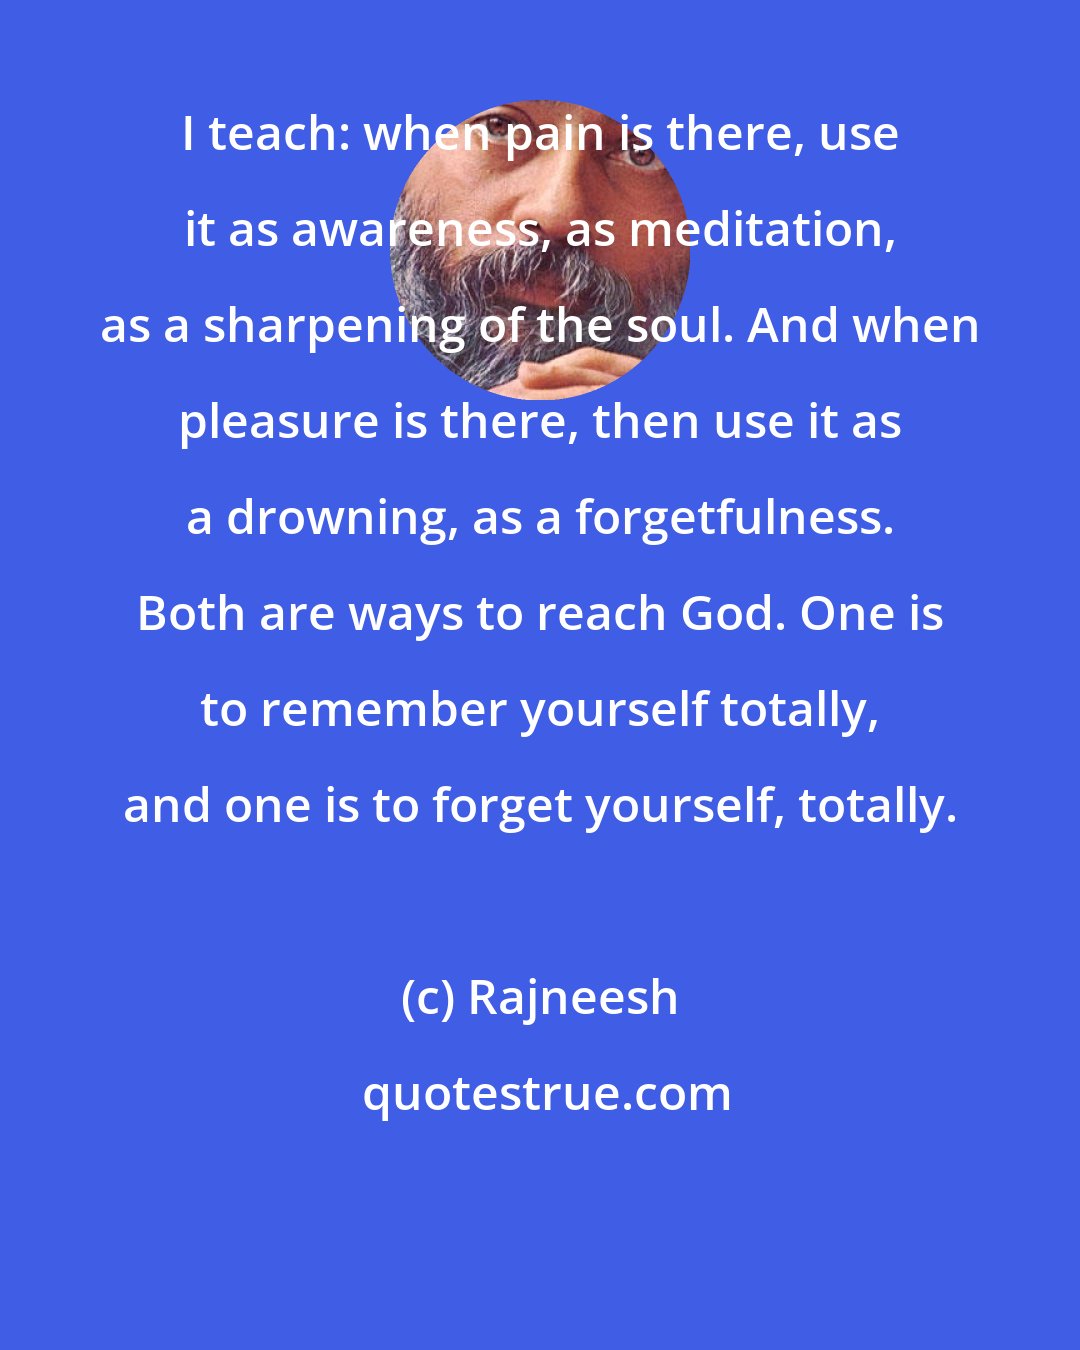 Rajneesh: I teach: when pain is there, use it as awareness, as meditation, as a sharpening of the soul. And when pleasure is there, then use it as a drowning, as a forgetfulness. Both are ways to reach God. One is to remember yourself totally, and one is to forget yourself, totally.